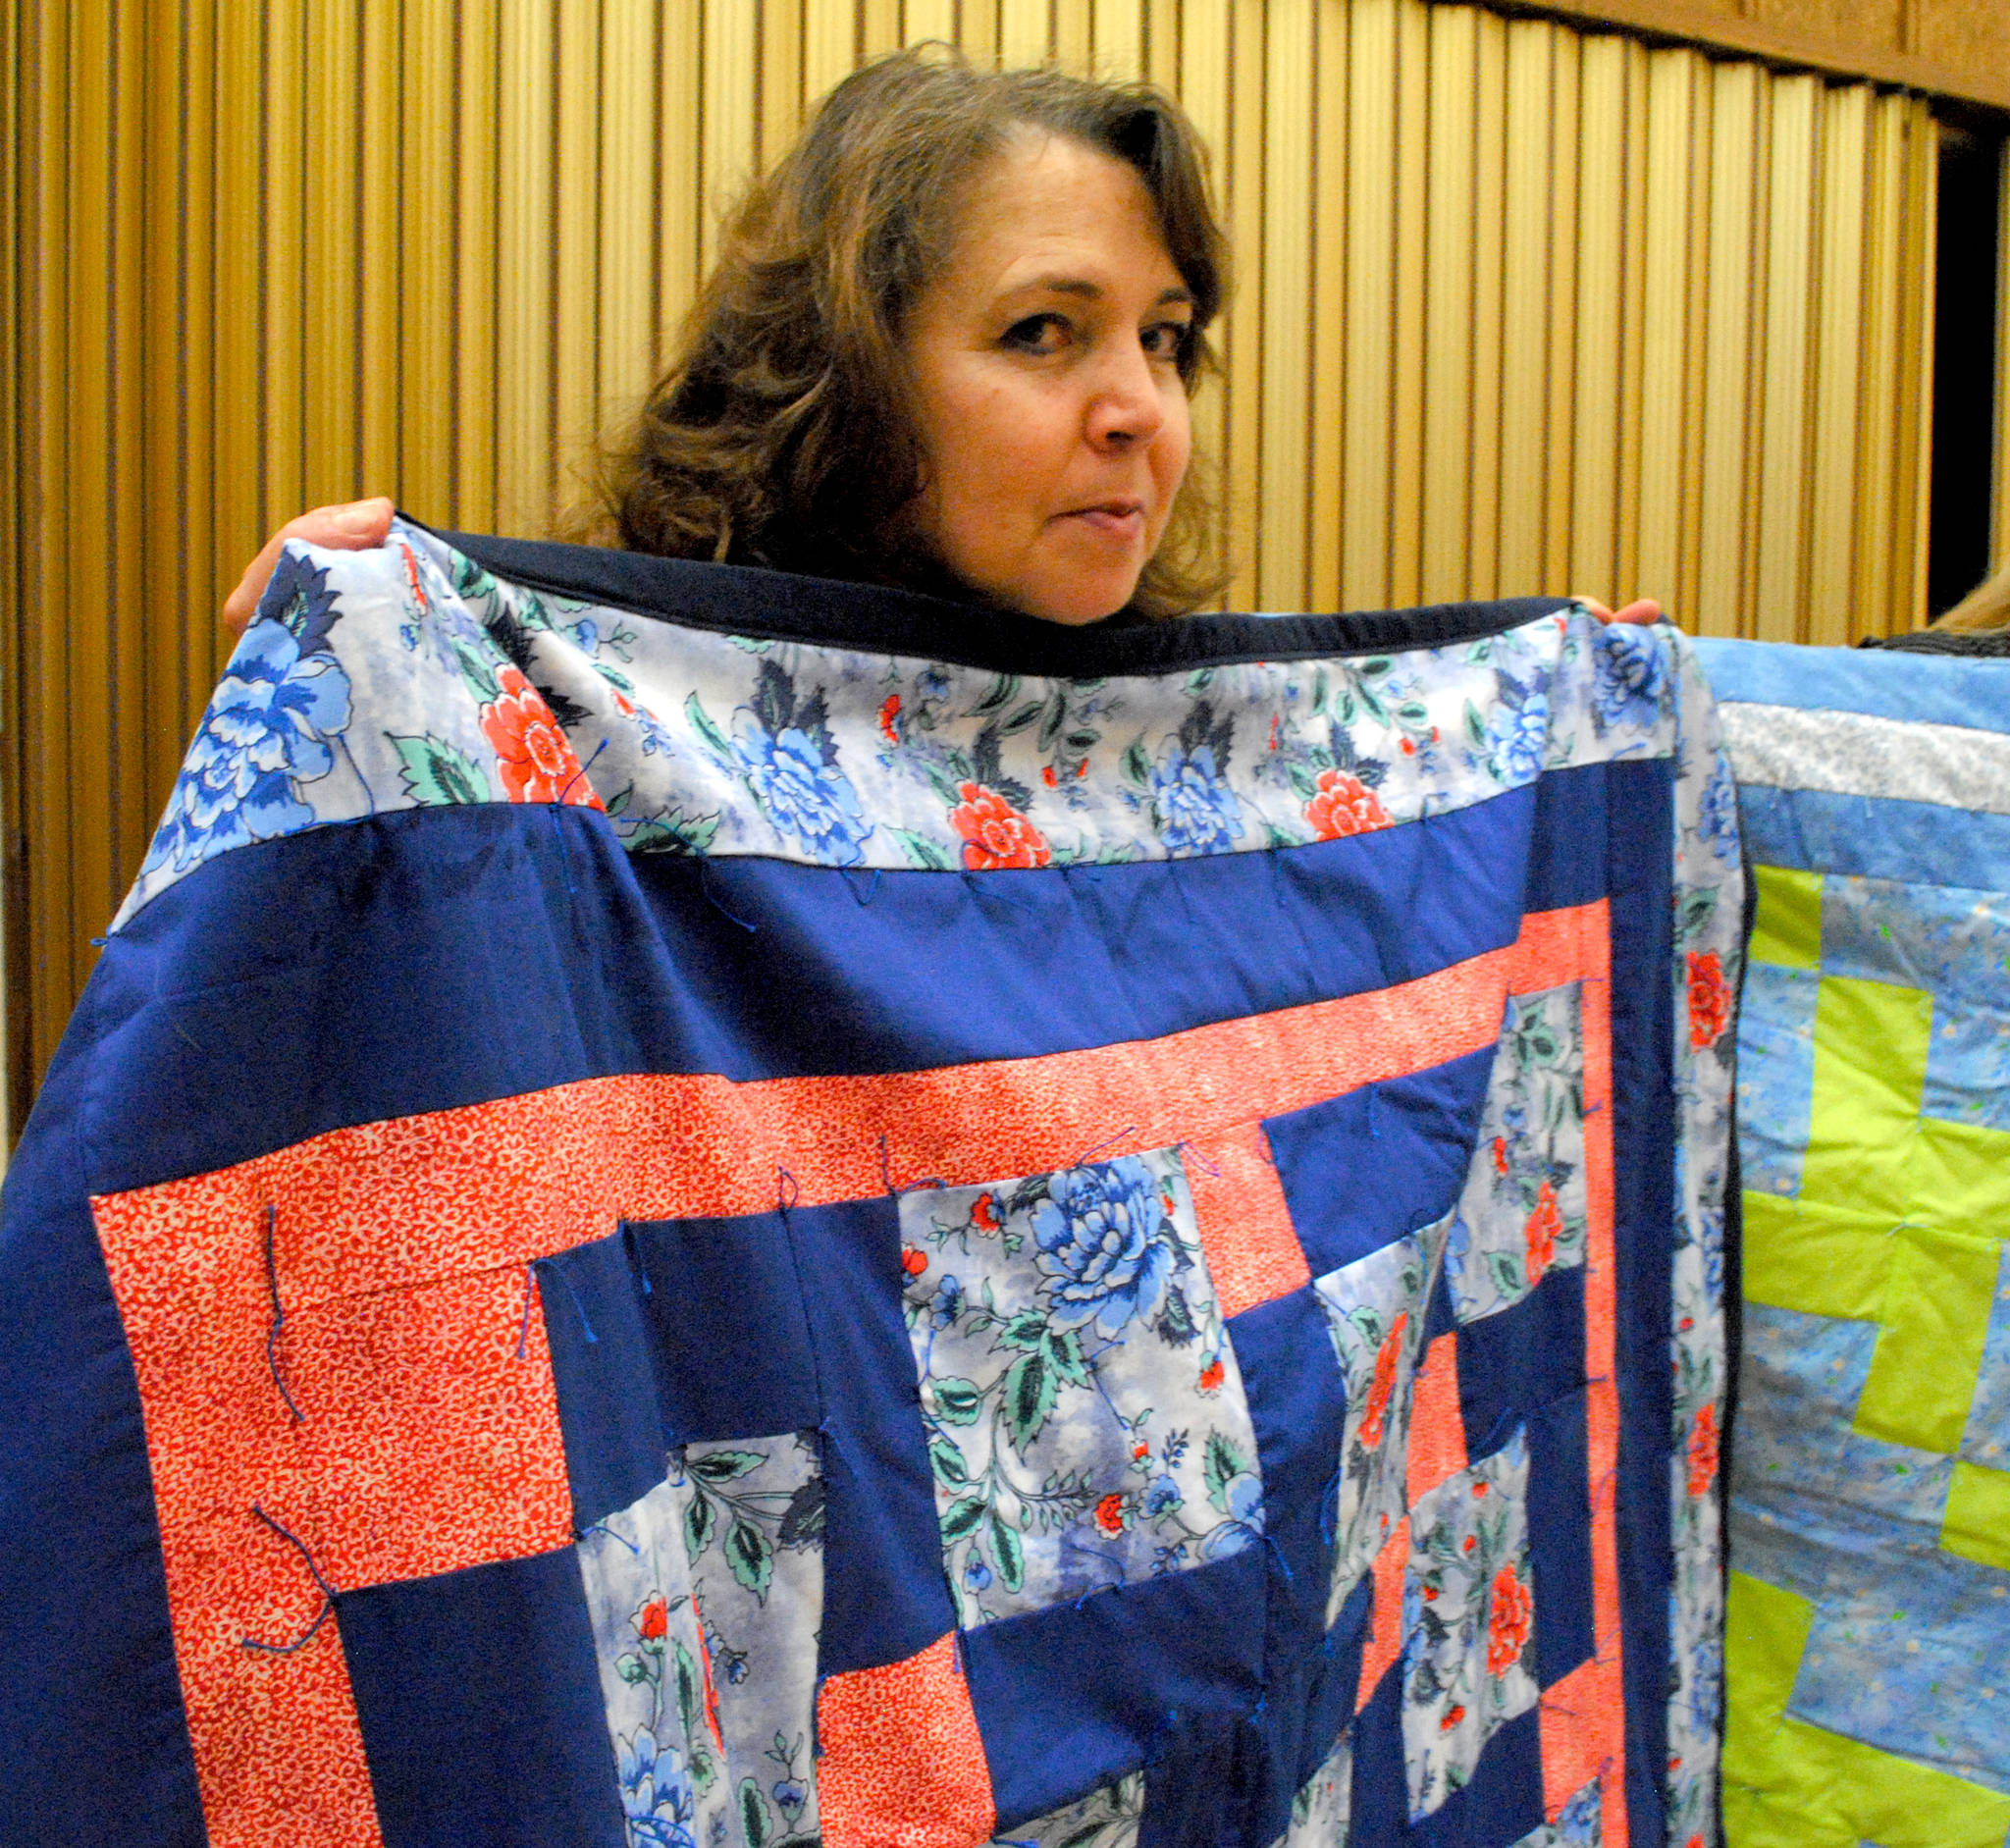 Christine Carlson of Kasilof shows off one of her quilted creations during the Church of Jesus Christ of Latter-Day Saints monthly humanitarian potluck meeting at the LDS Church in Soldotna, Alaska on Nov. 30, 2017. Carlson has been quilting since an early age and has made 35 quilts this year for different charities and organizations. (Photo by Kat Sorensen/Peninsula Clarion)